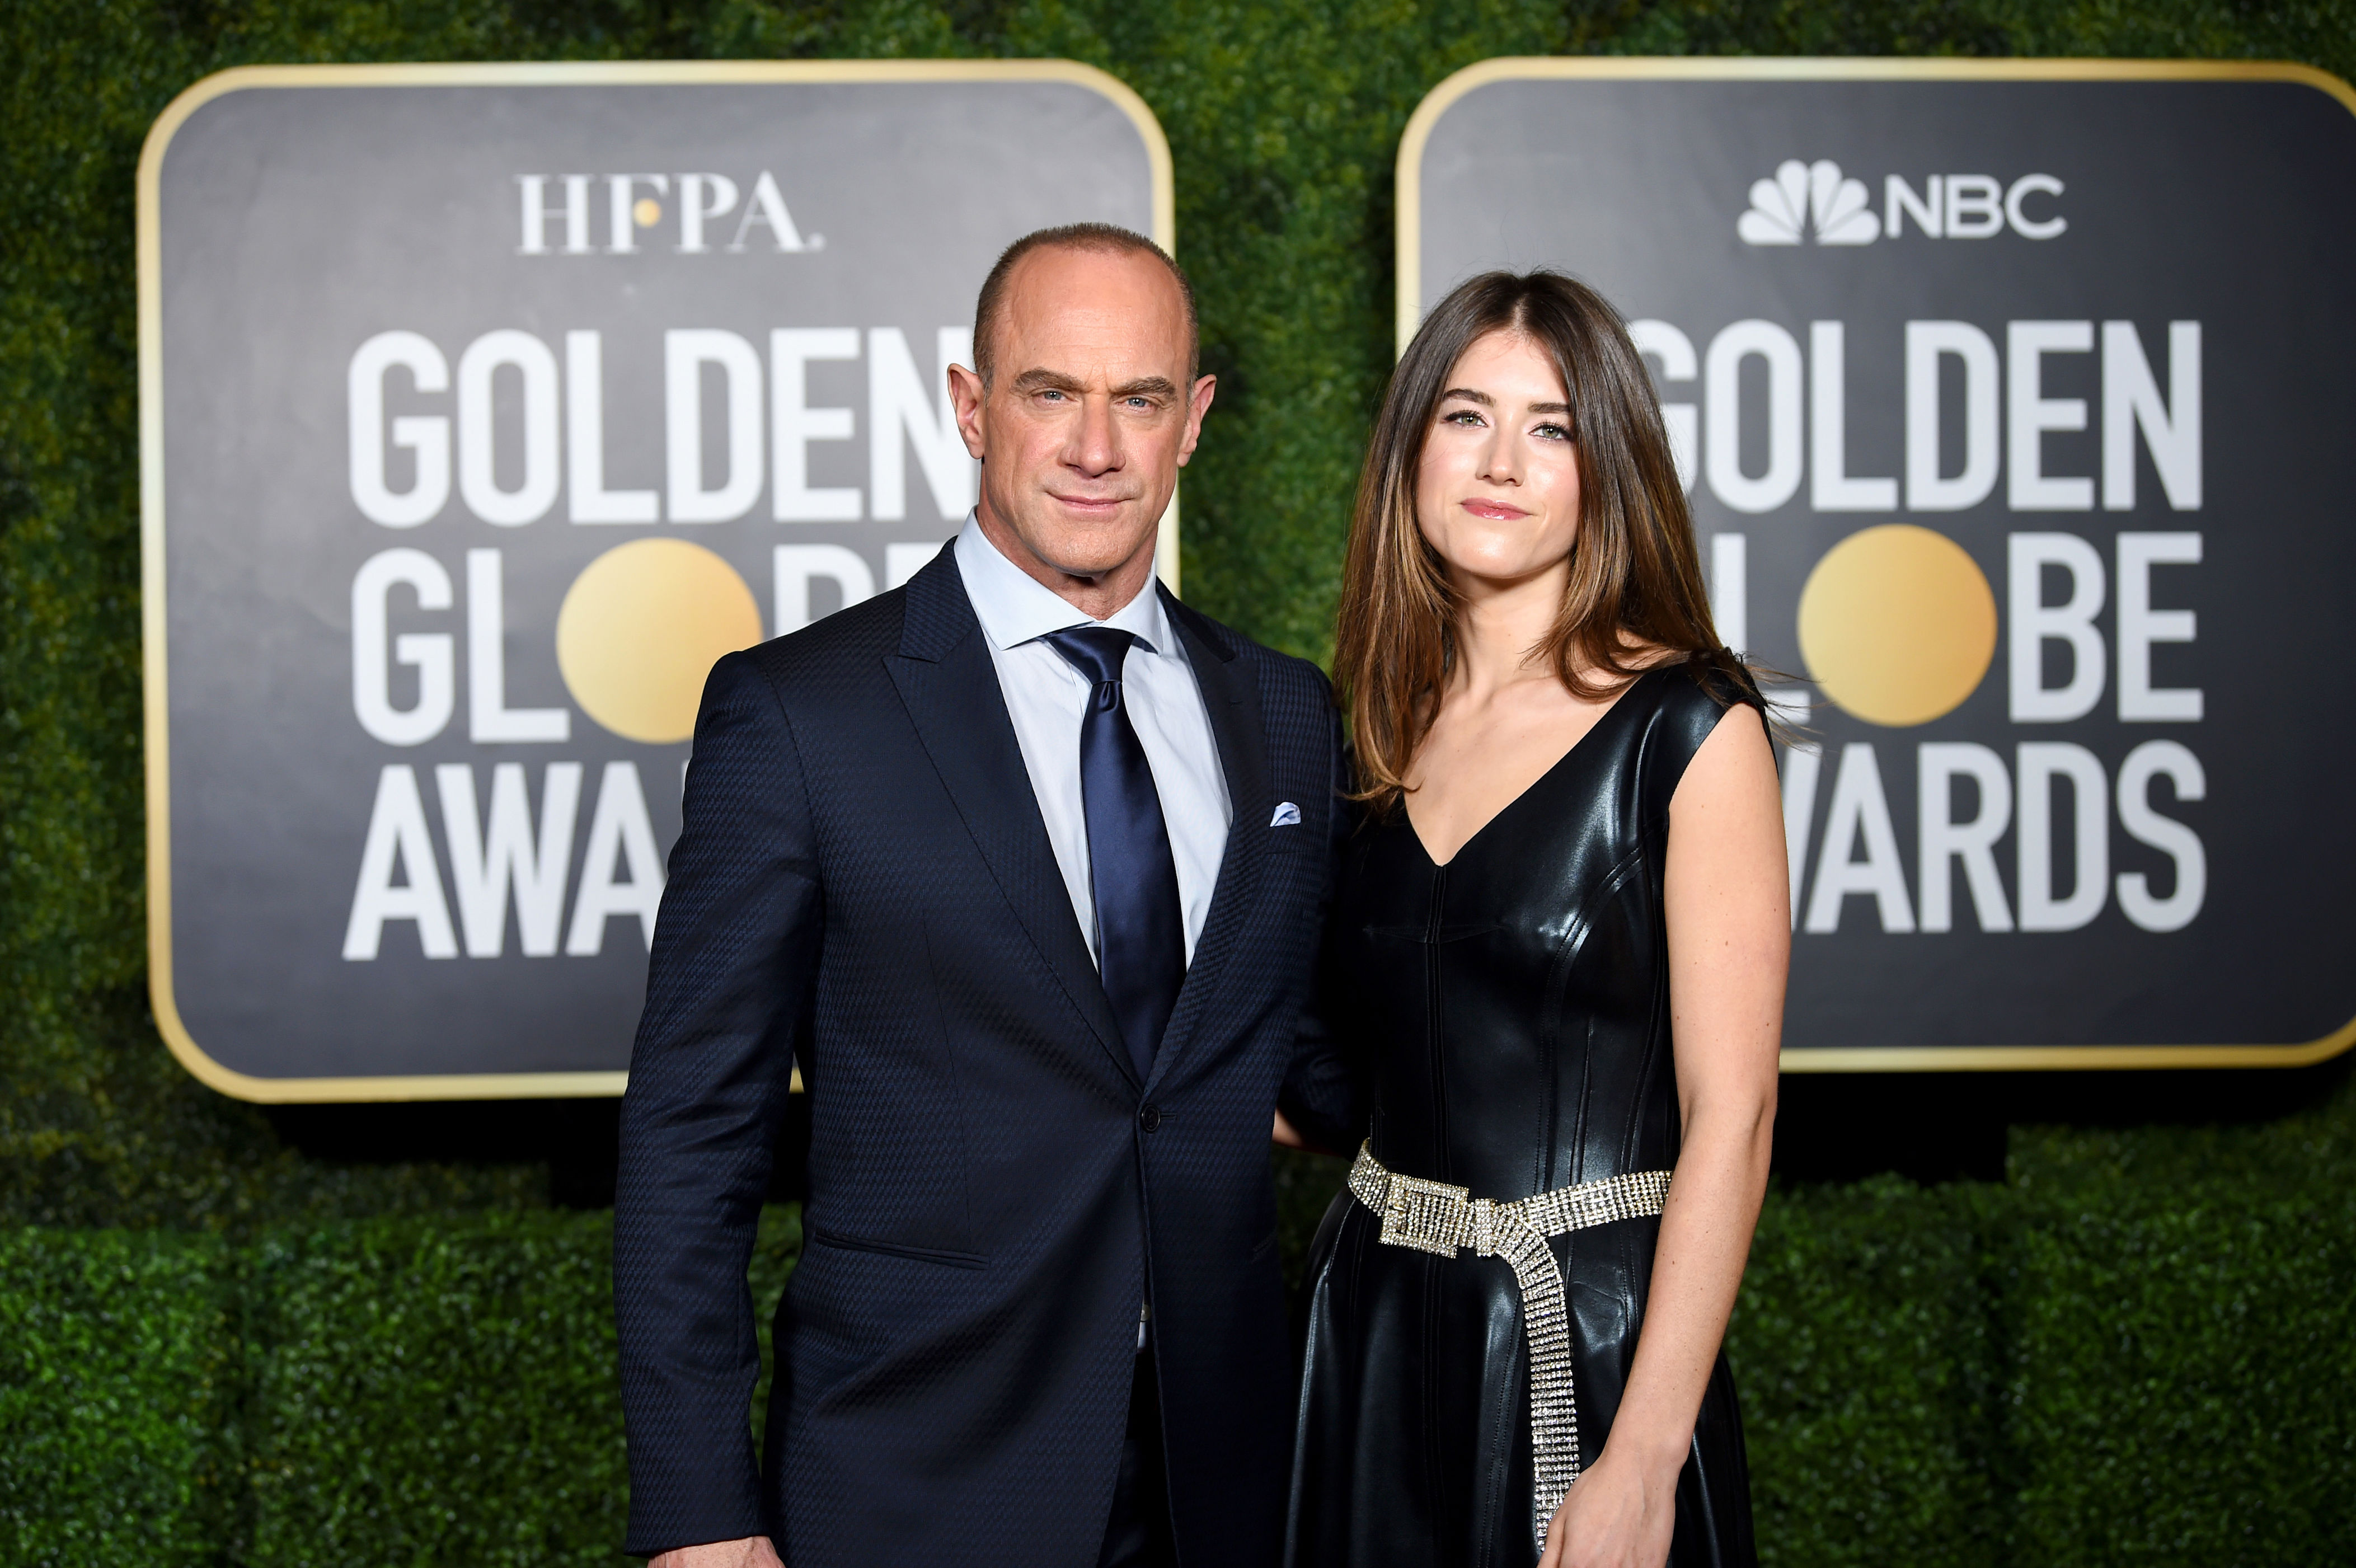 <p>"Law and Order: Organized Crime" star Christopher Meloni brought daughter Sophia Meloni, who was born in 2011, to the east coast taping of the <a href="https://www.wonderwall.com/awards-events/2021-golden-globes-see-all-the-photos-from-the-red-carpet-431076.gallery">Golden Globe Awards</a> in New York City in February 2021.</p>